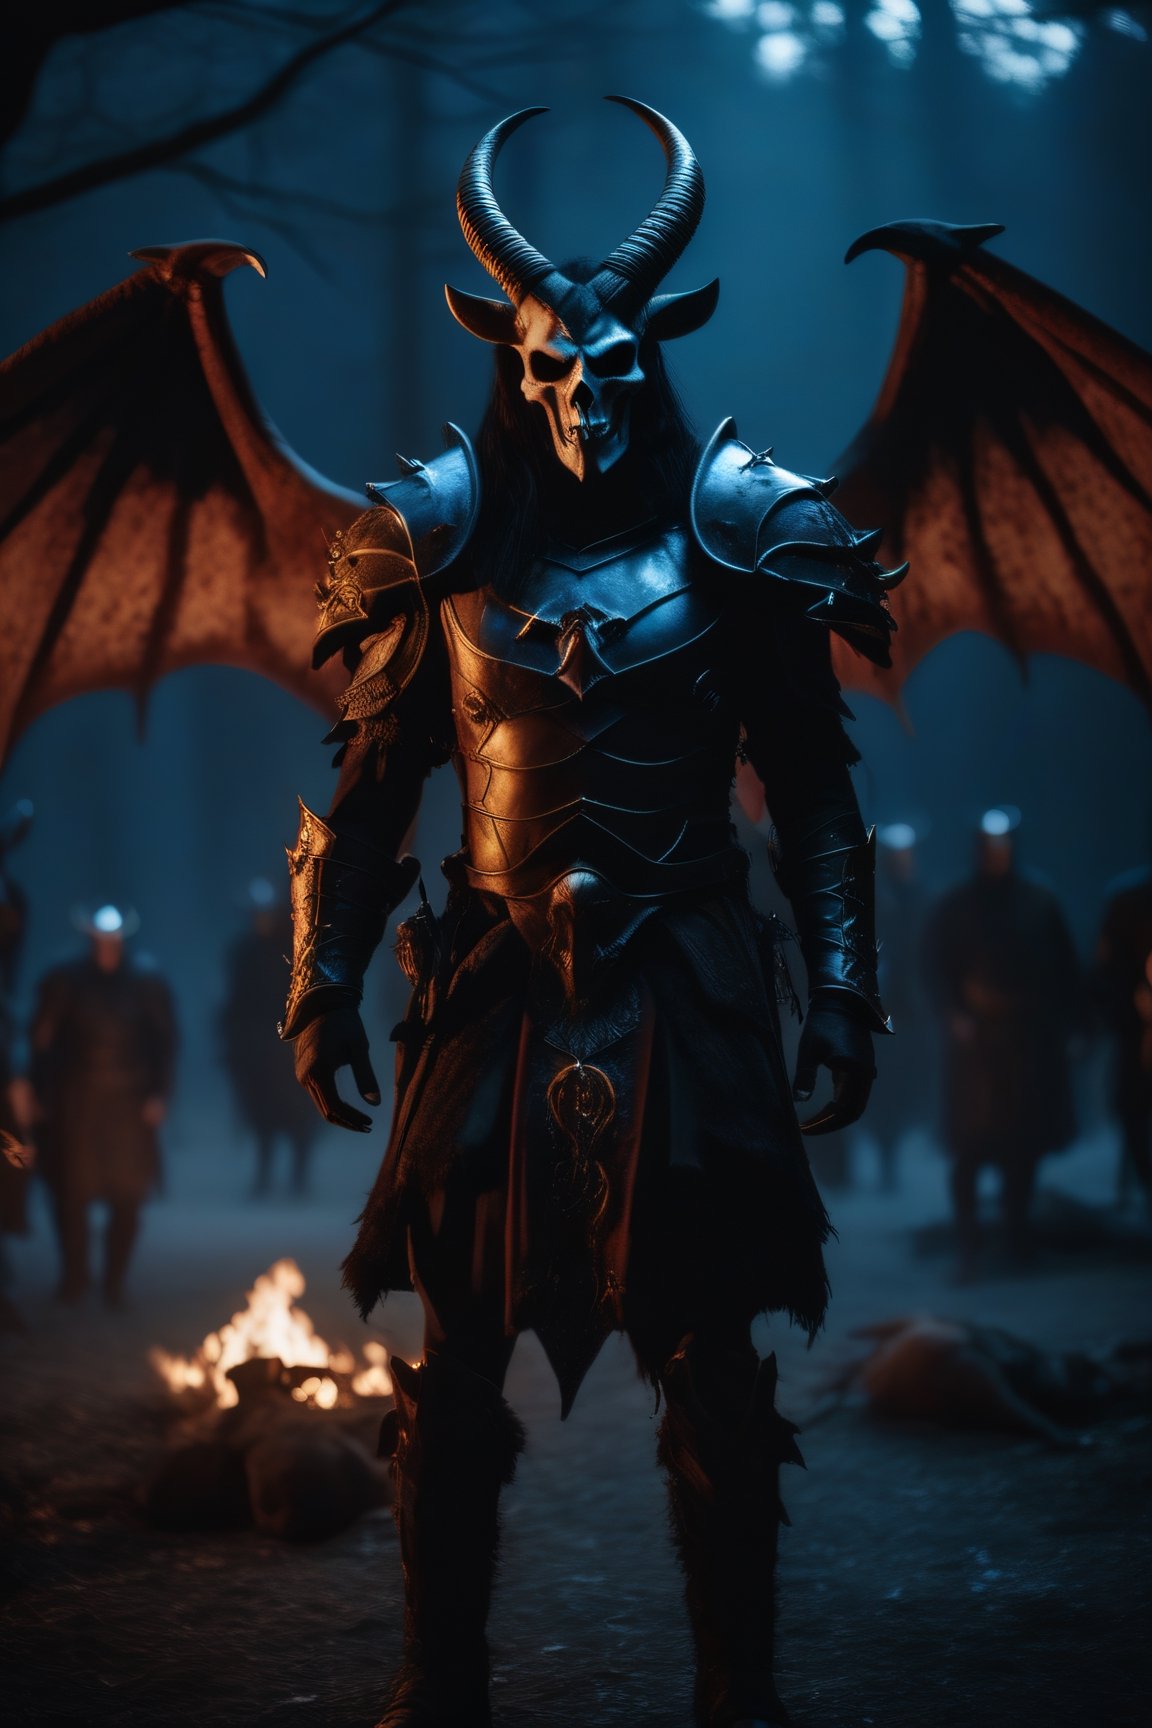 cinematic film still, solo, demon with goat head with big horns, strong and strong upper body, demon skins, skins, (claws, wings)), demonic armor, blood splatter, skulls on the ground, standing in blood ritual, medieval, at night, blue hour, shallow depth of field, vignette, highly detailed, high budget, bokeh, cinemascope, moody, epic, gorgeous, film grain, grainy